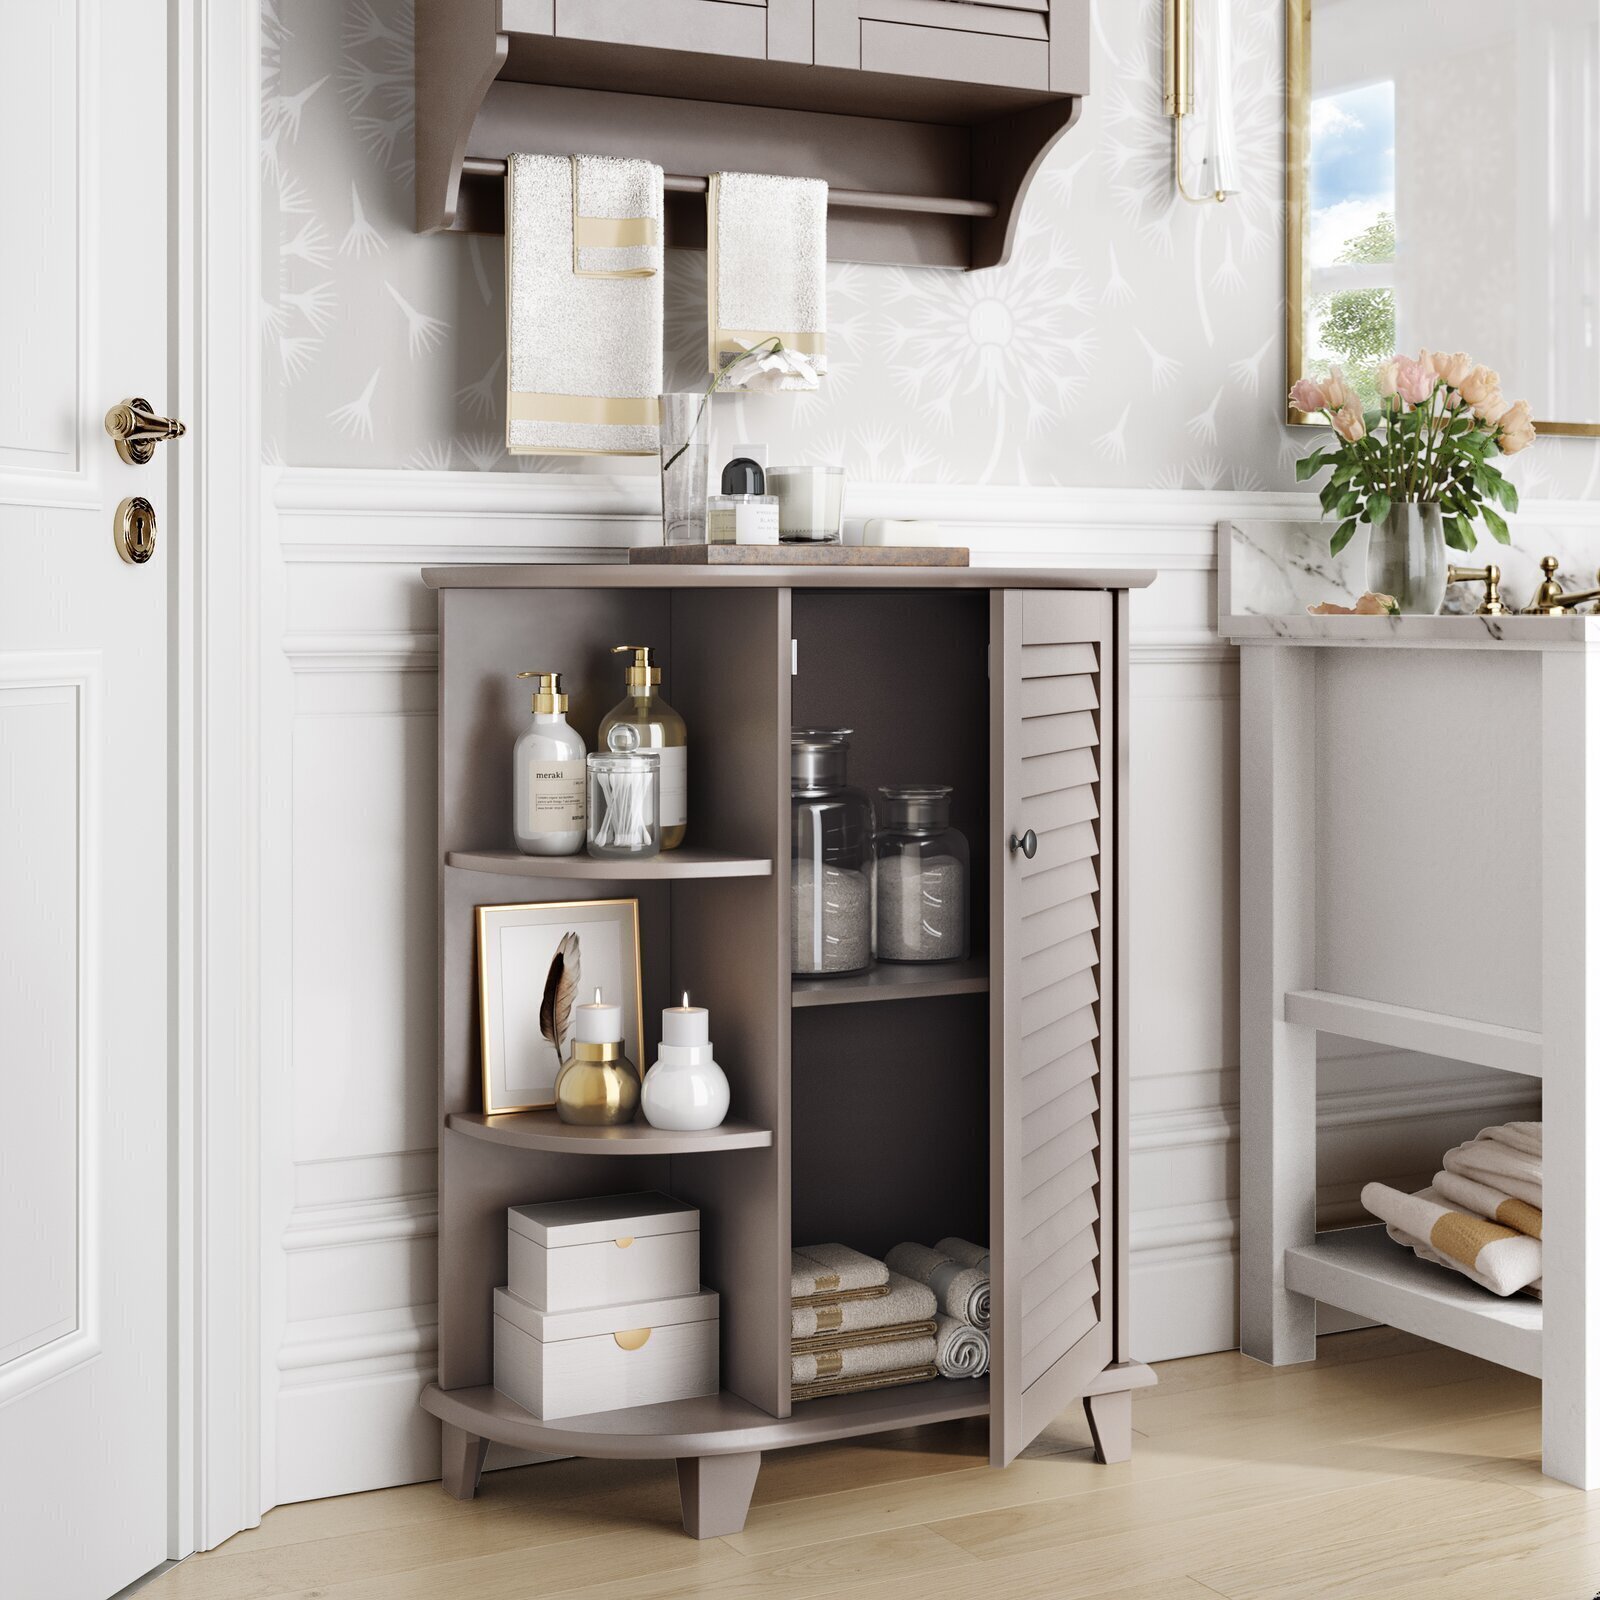 Bathroom Cabinet with Rounded Shelves